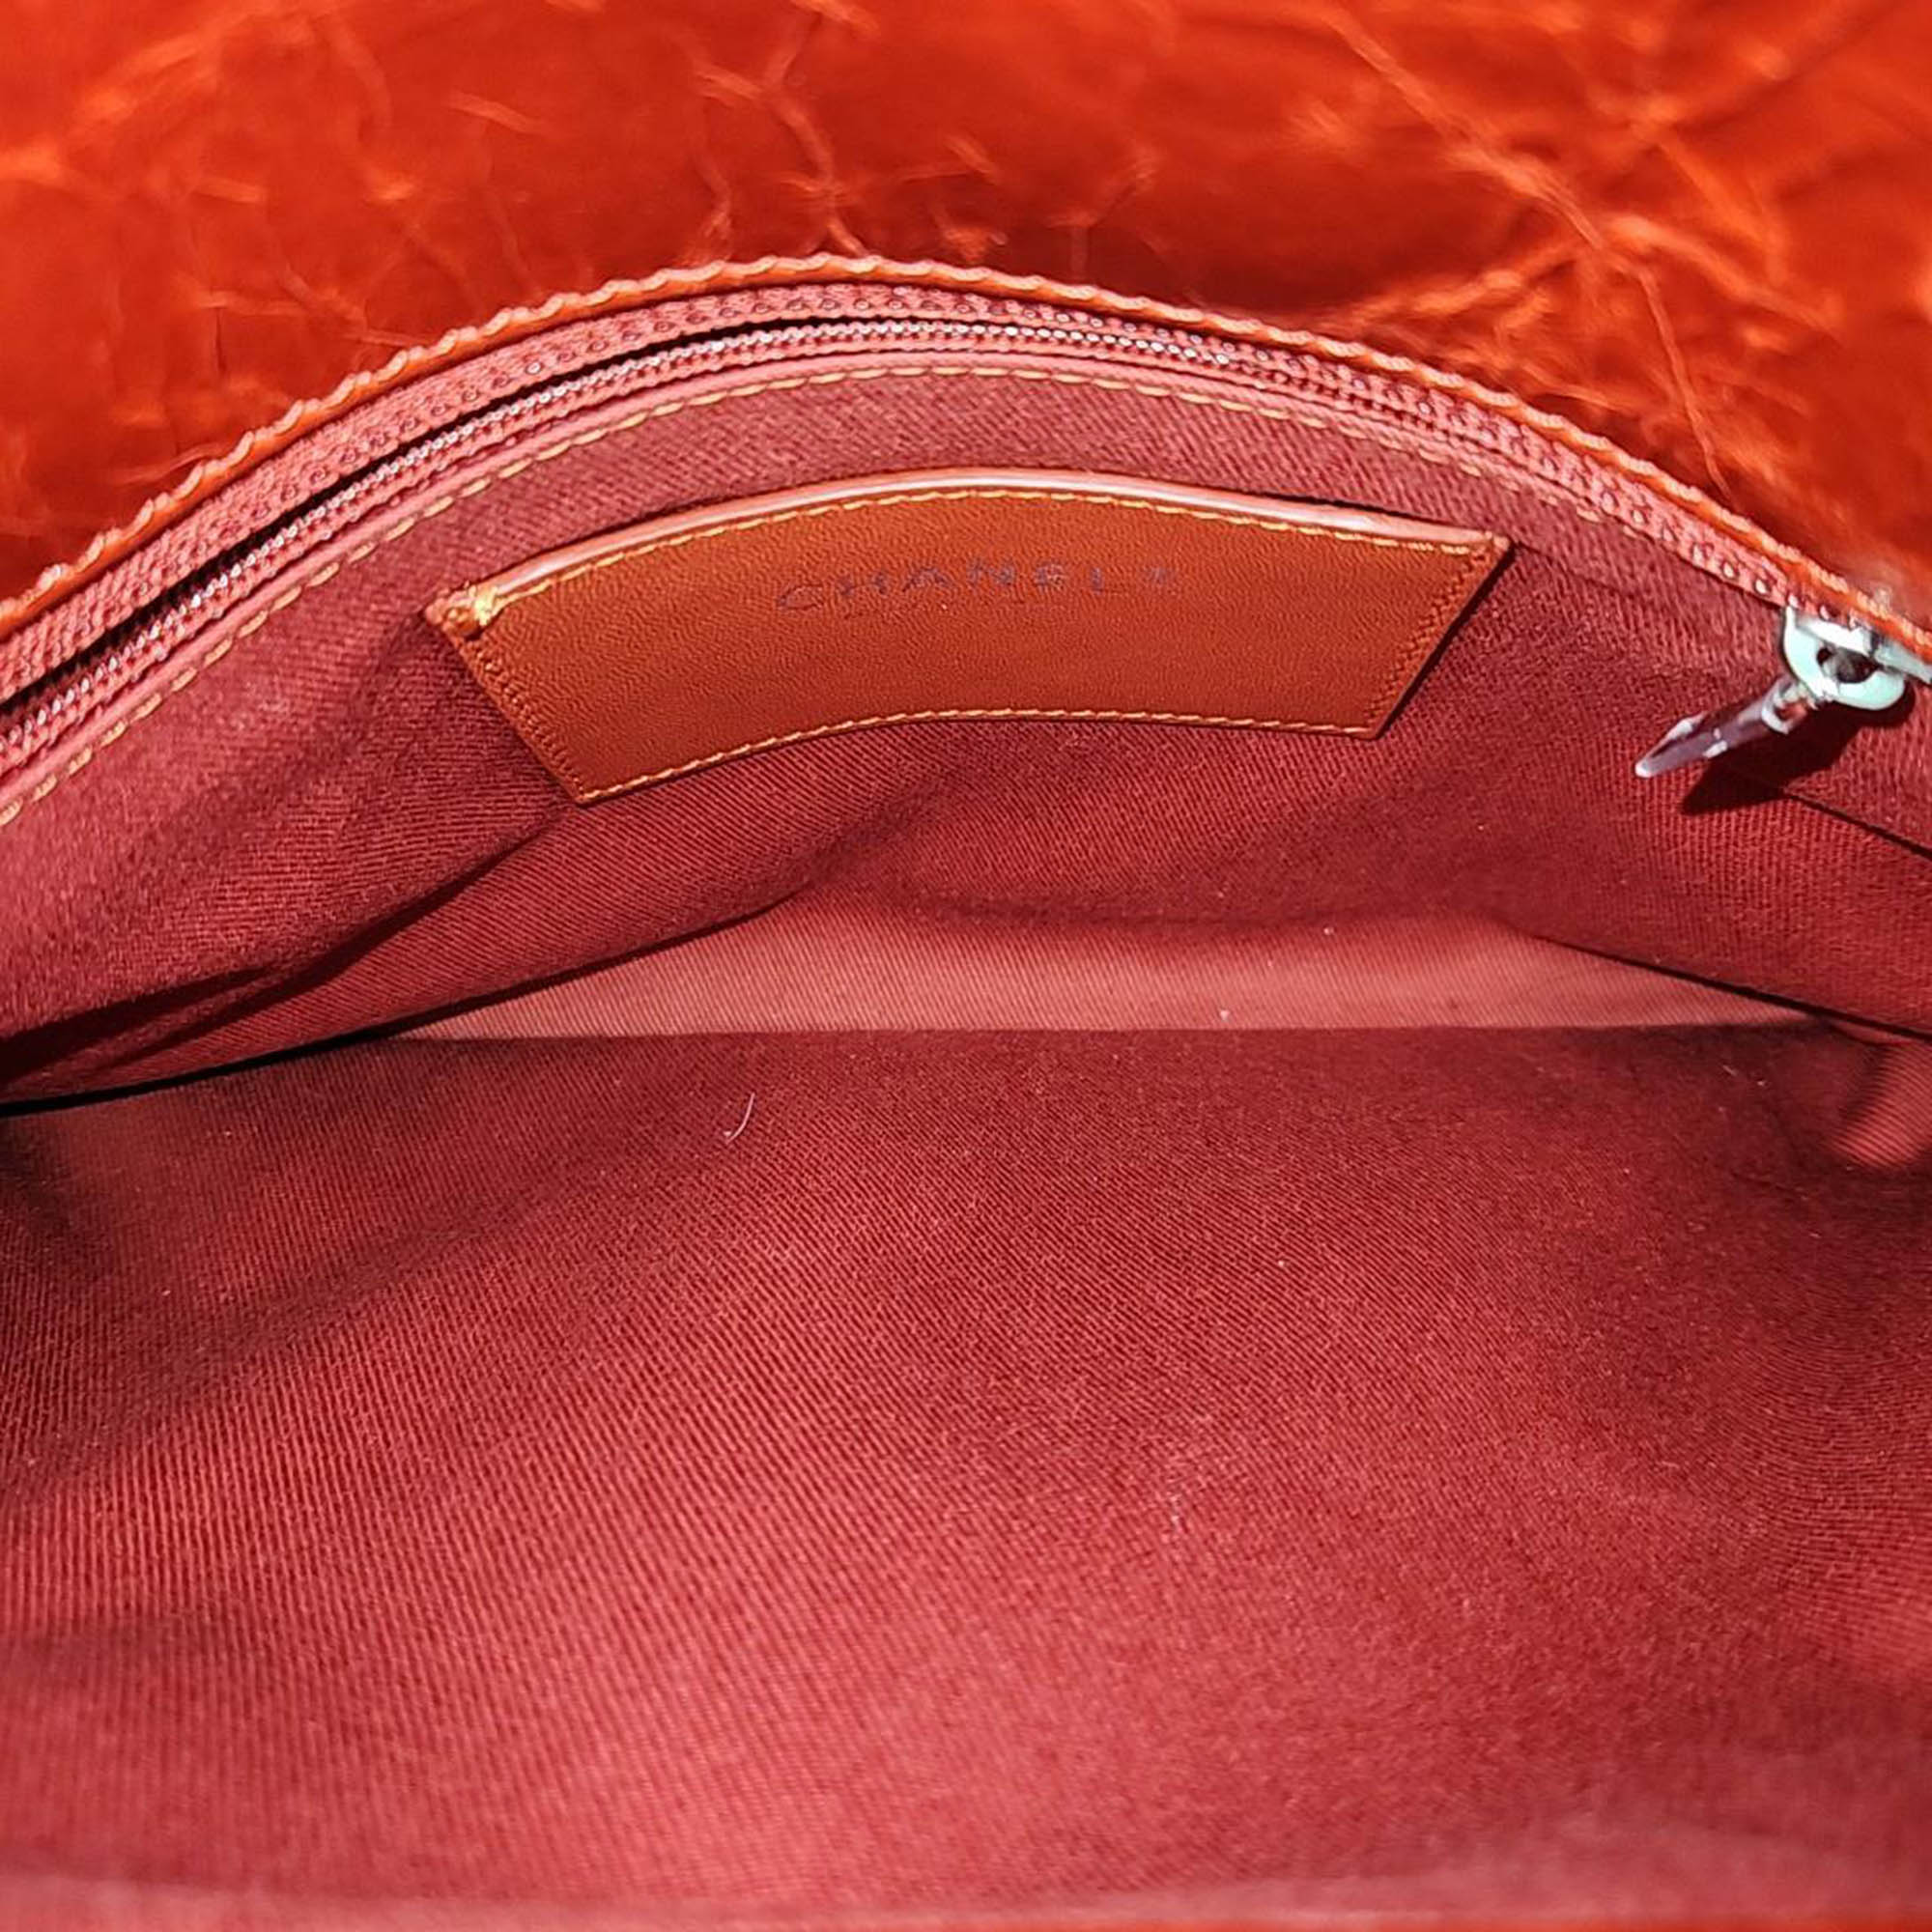 Chanel Red Leather Mademoiselle Bowling Bag